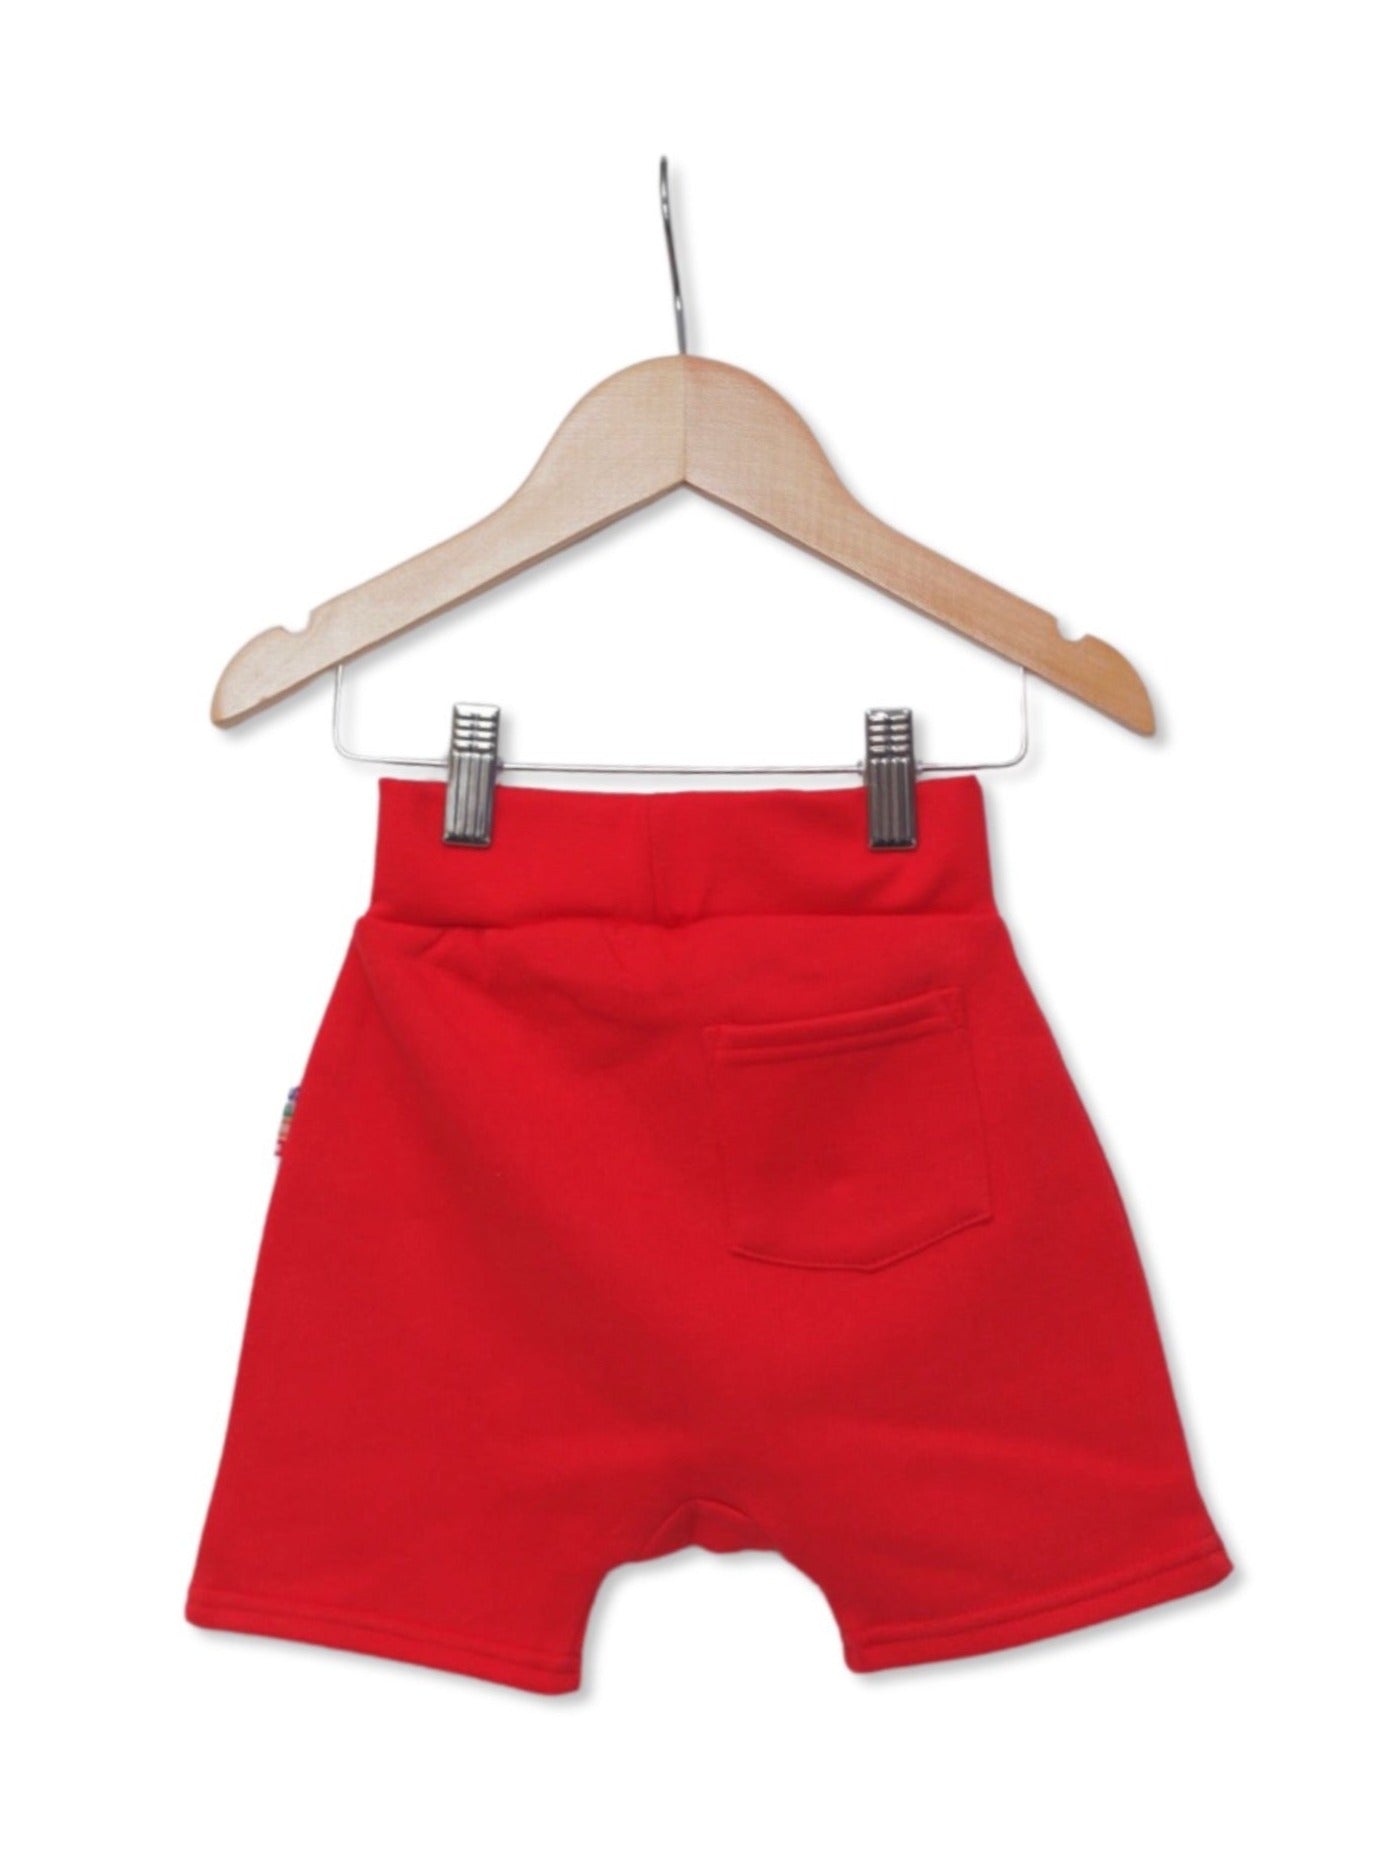 Kids Red Unisex Shorts Back View - Hues Clothing